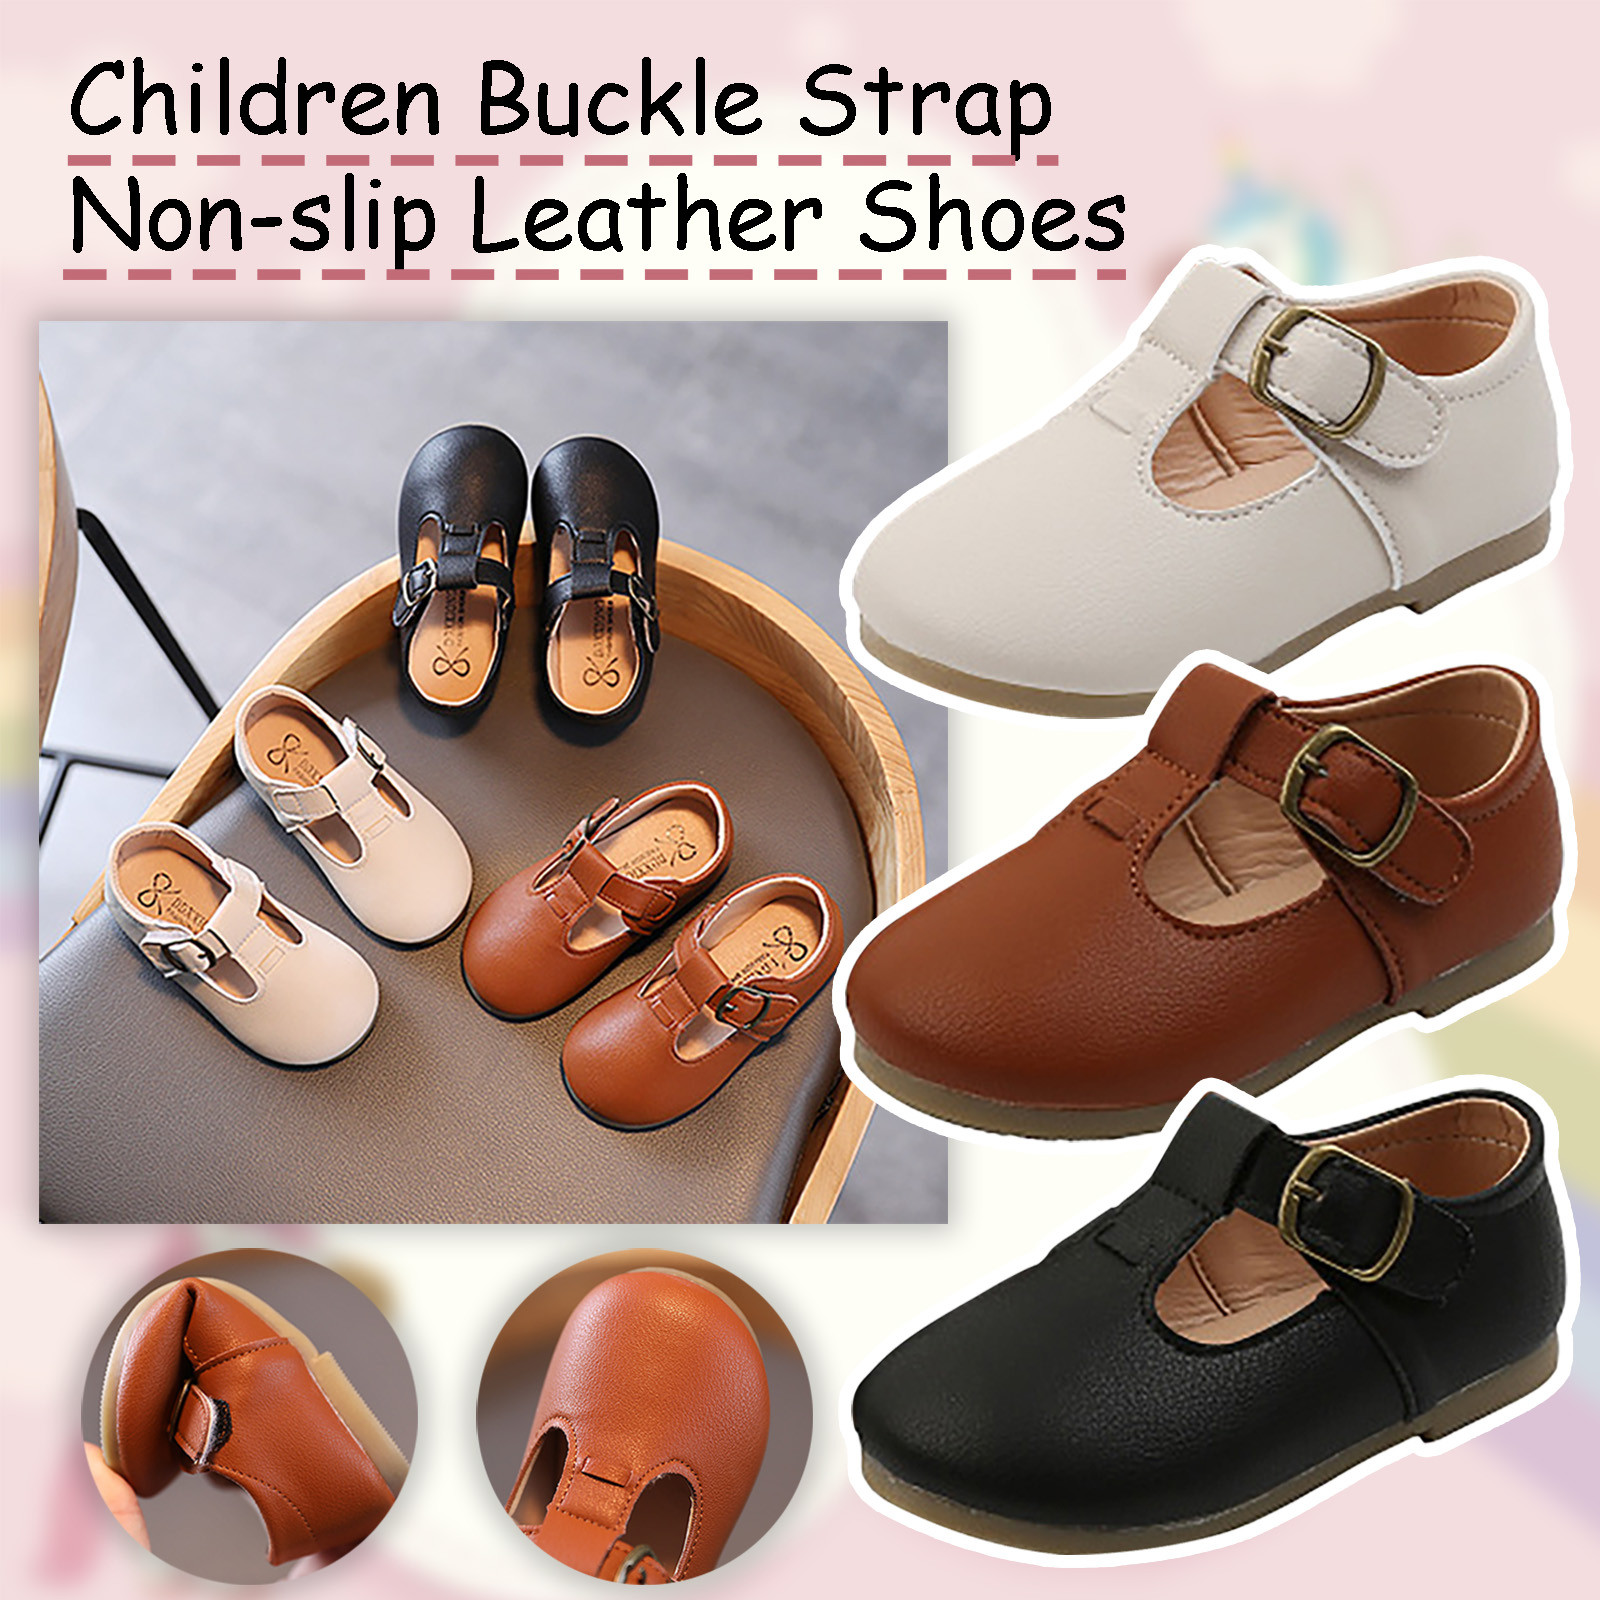 Children-Leather-Shoes-Girls-Boys-Non-slip-T-Buckle-Strap-Flats-Baby-Shoes-Infant-First-Walkers-1